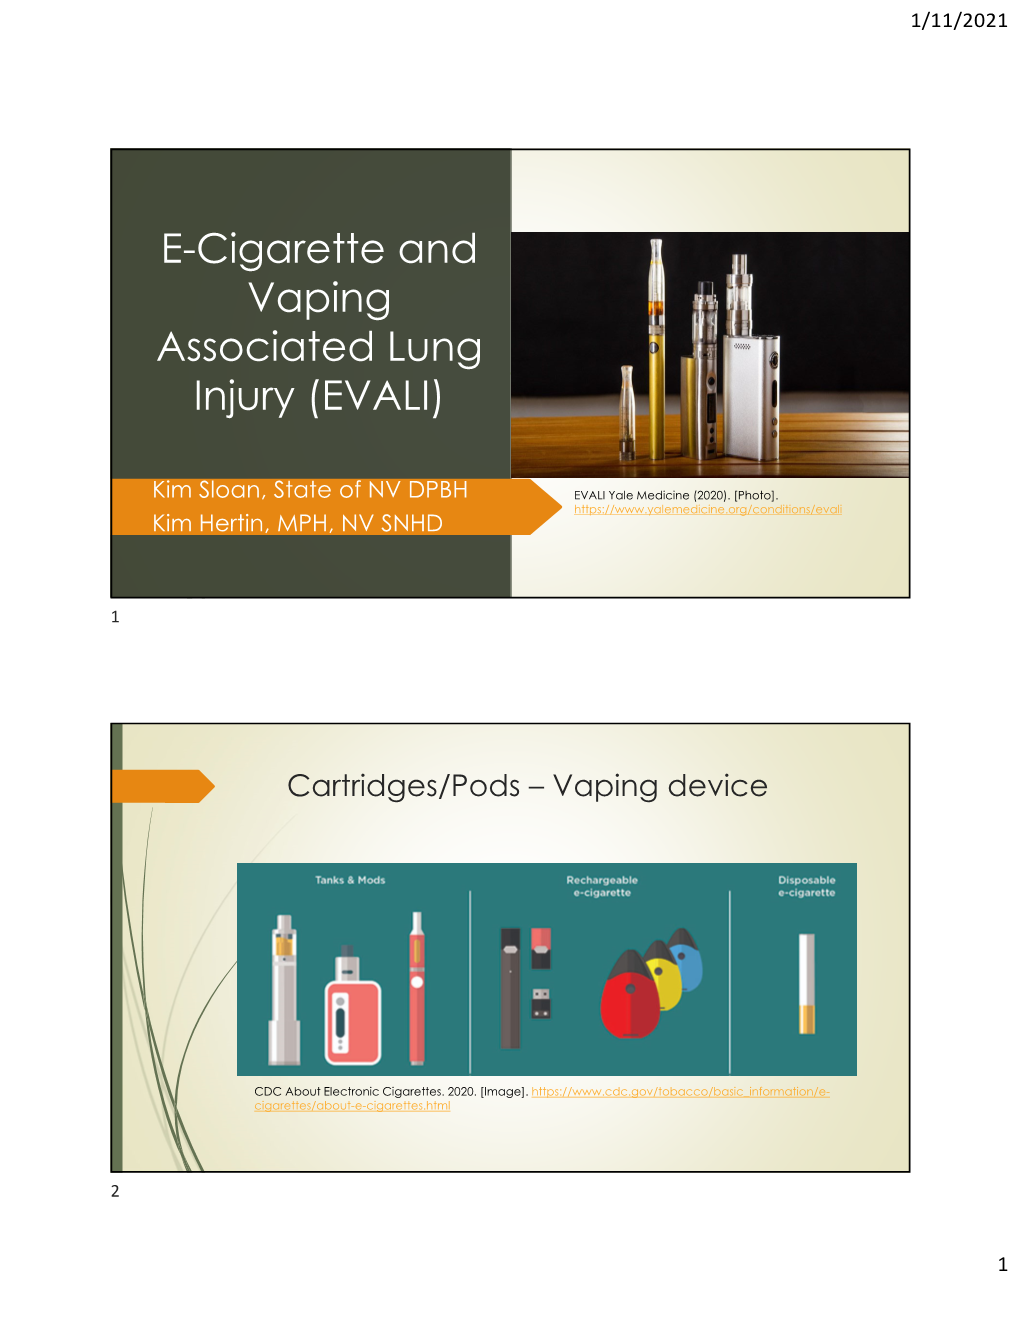 E-Cigarette and Vaping Associated Lung Injury (EVALI)